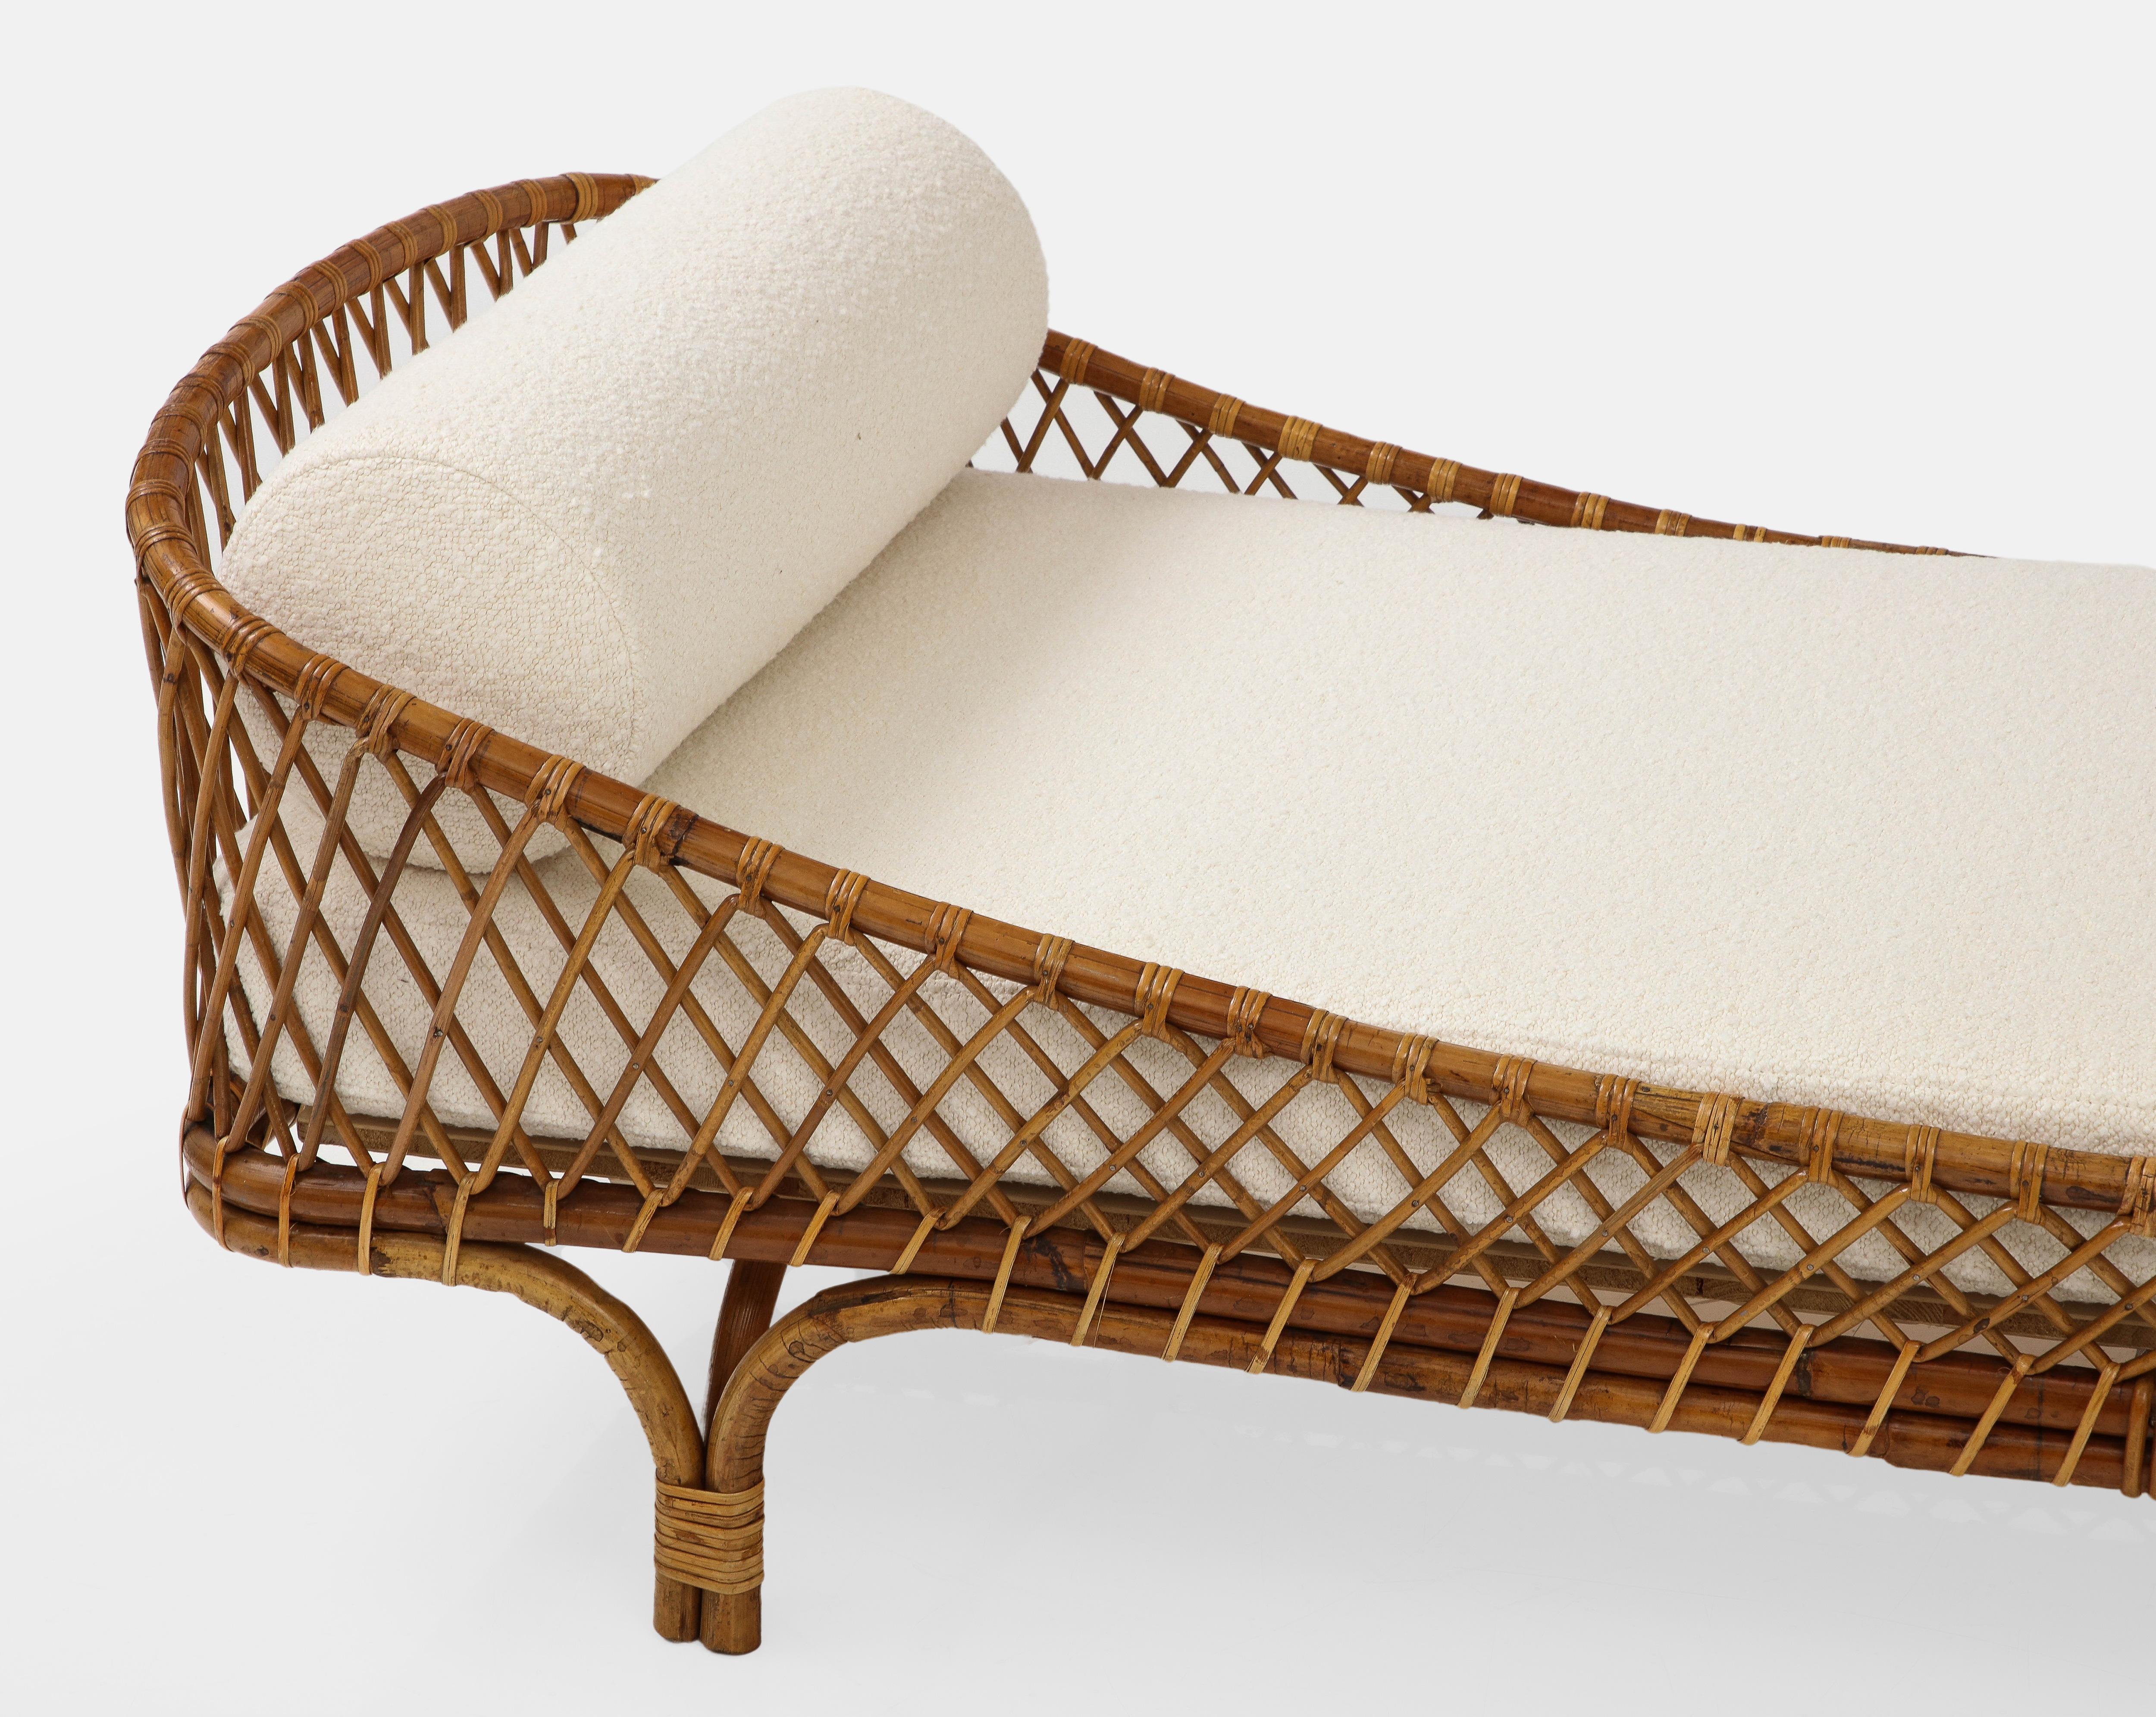 Rare Bonacina Rattan Daybed in Ivory Bouclé with Custom Mattress, Italy, 1960s In Good Condition For Sale In New York, NY